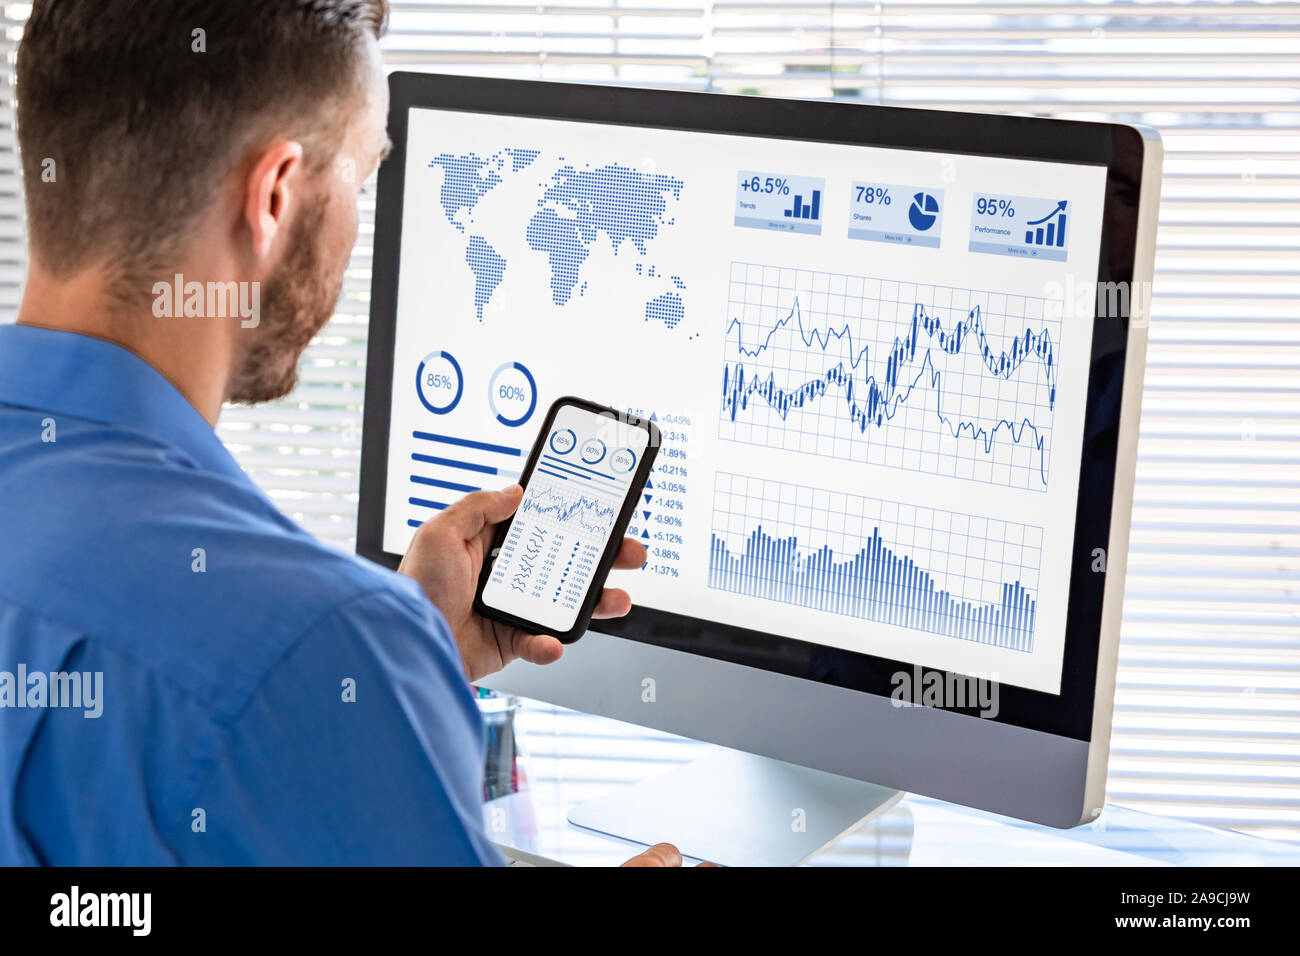 Analyst working on business analytics dashboard for financial investment on stock market exchange, analyzing metrics and KPI (Key Performance Indicato Stock Photo